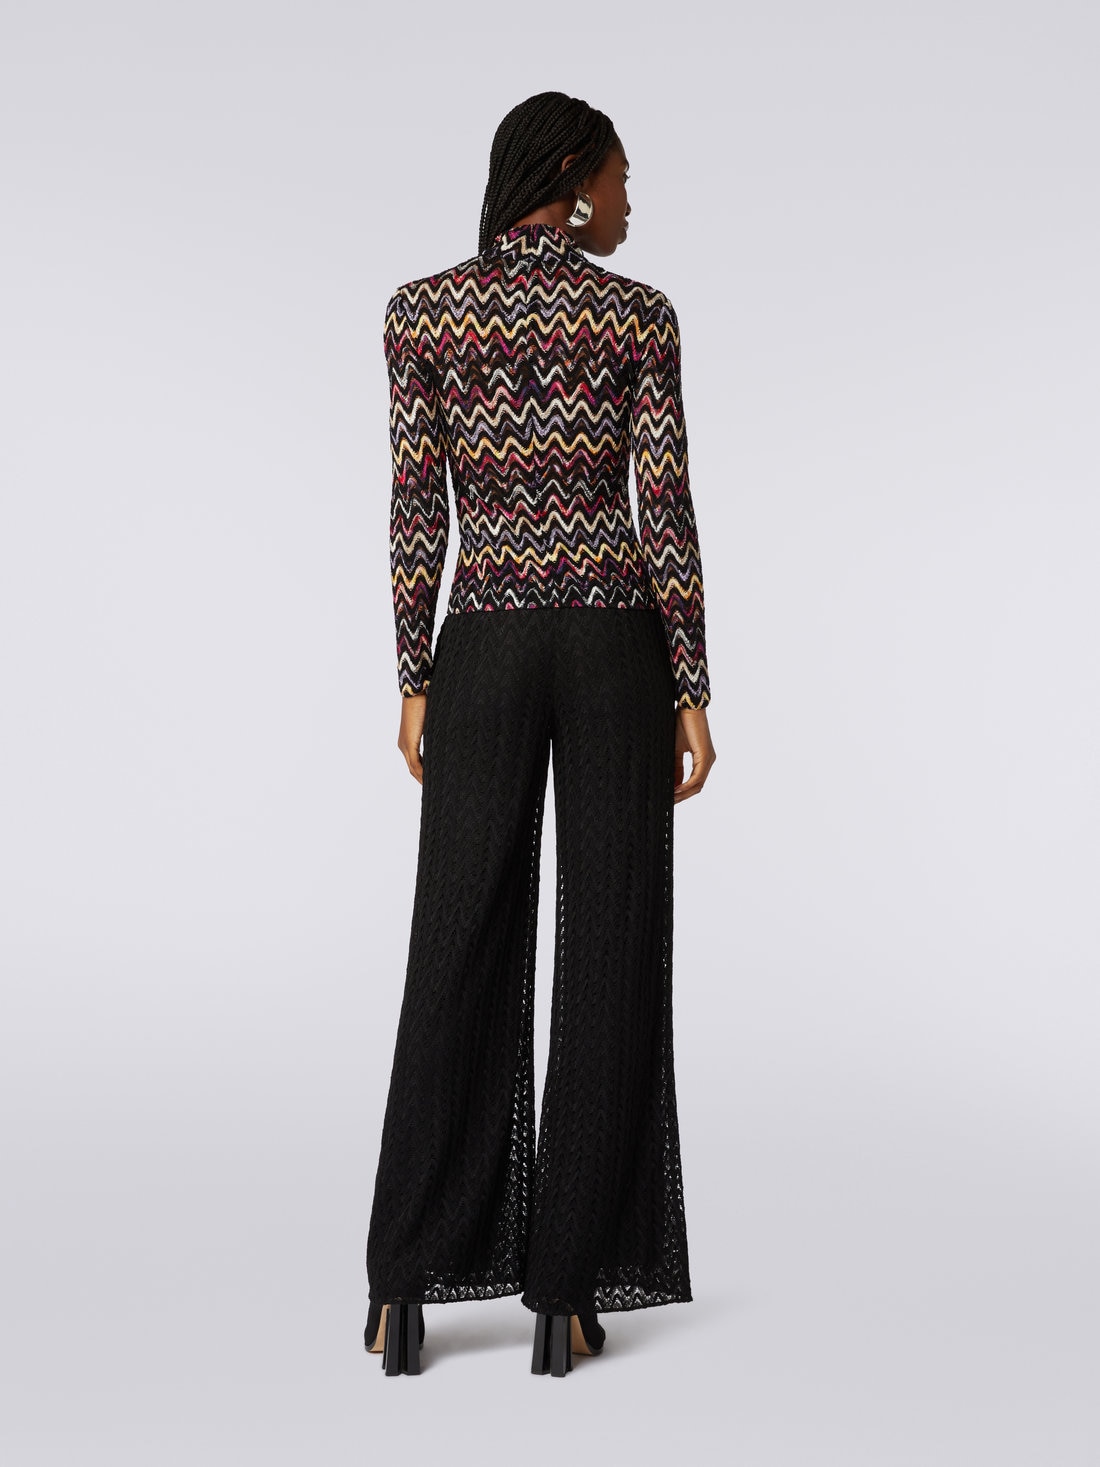 Palazzo pants in raschel knit wool and viscose, Black    - DS23WI0WBR00NU93911 - 3